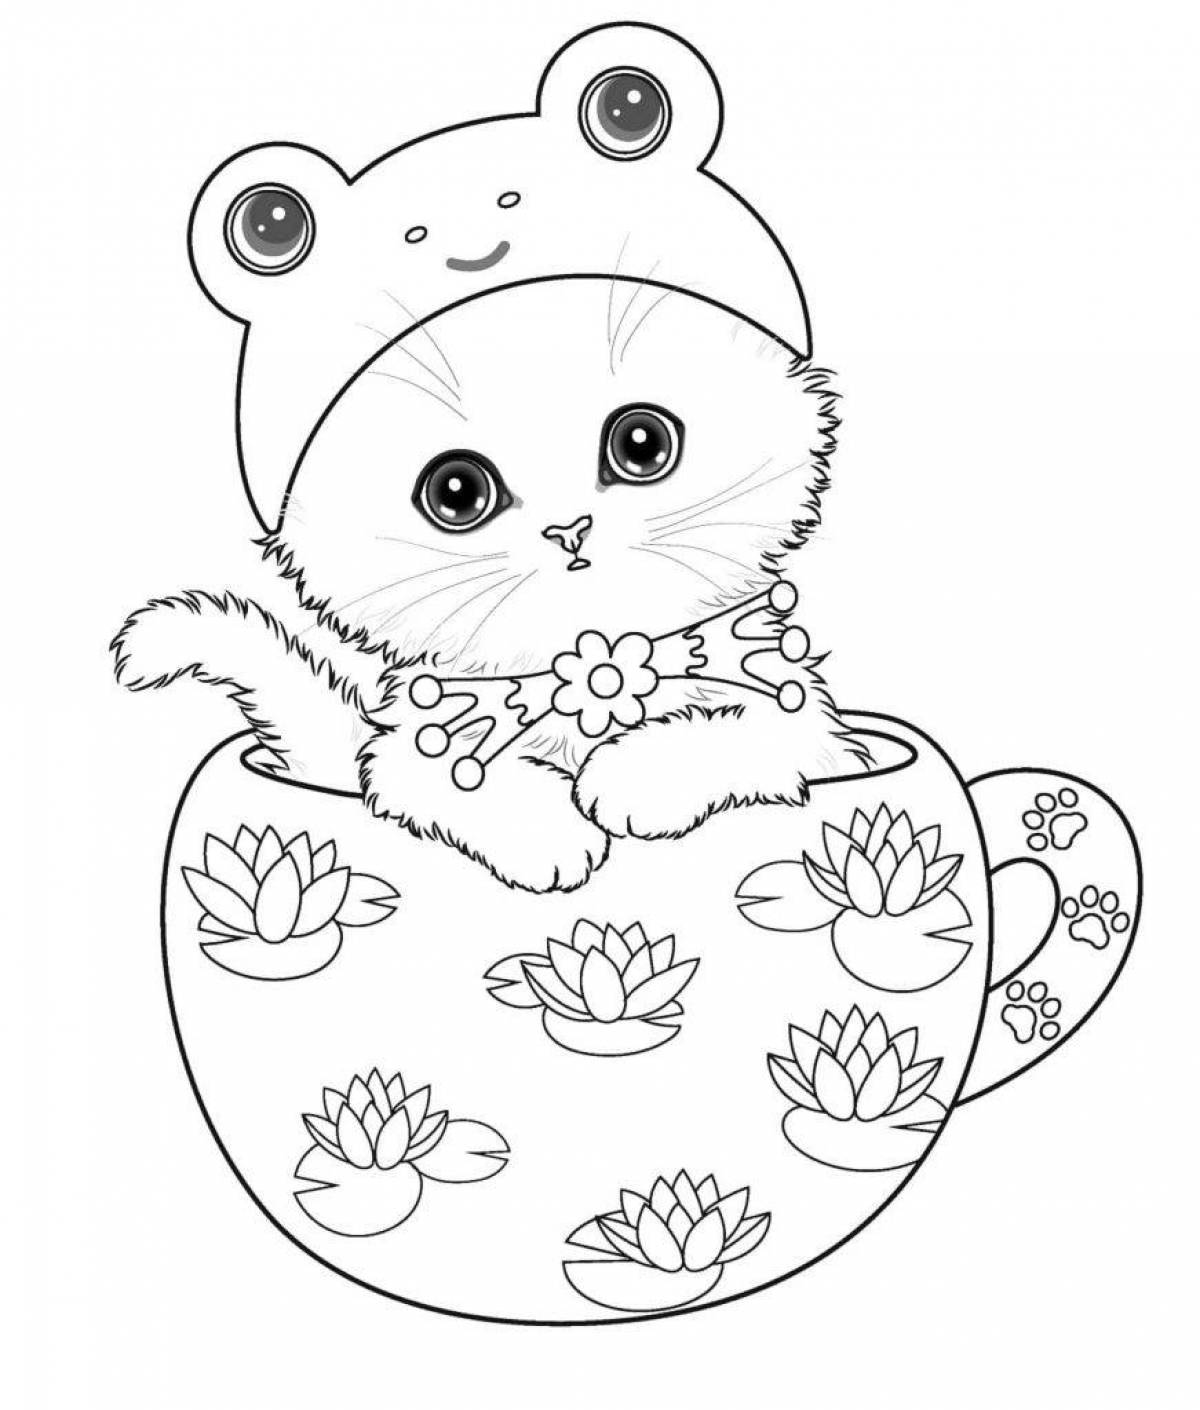 Coloring book for kitty girls